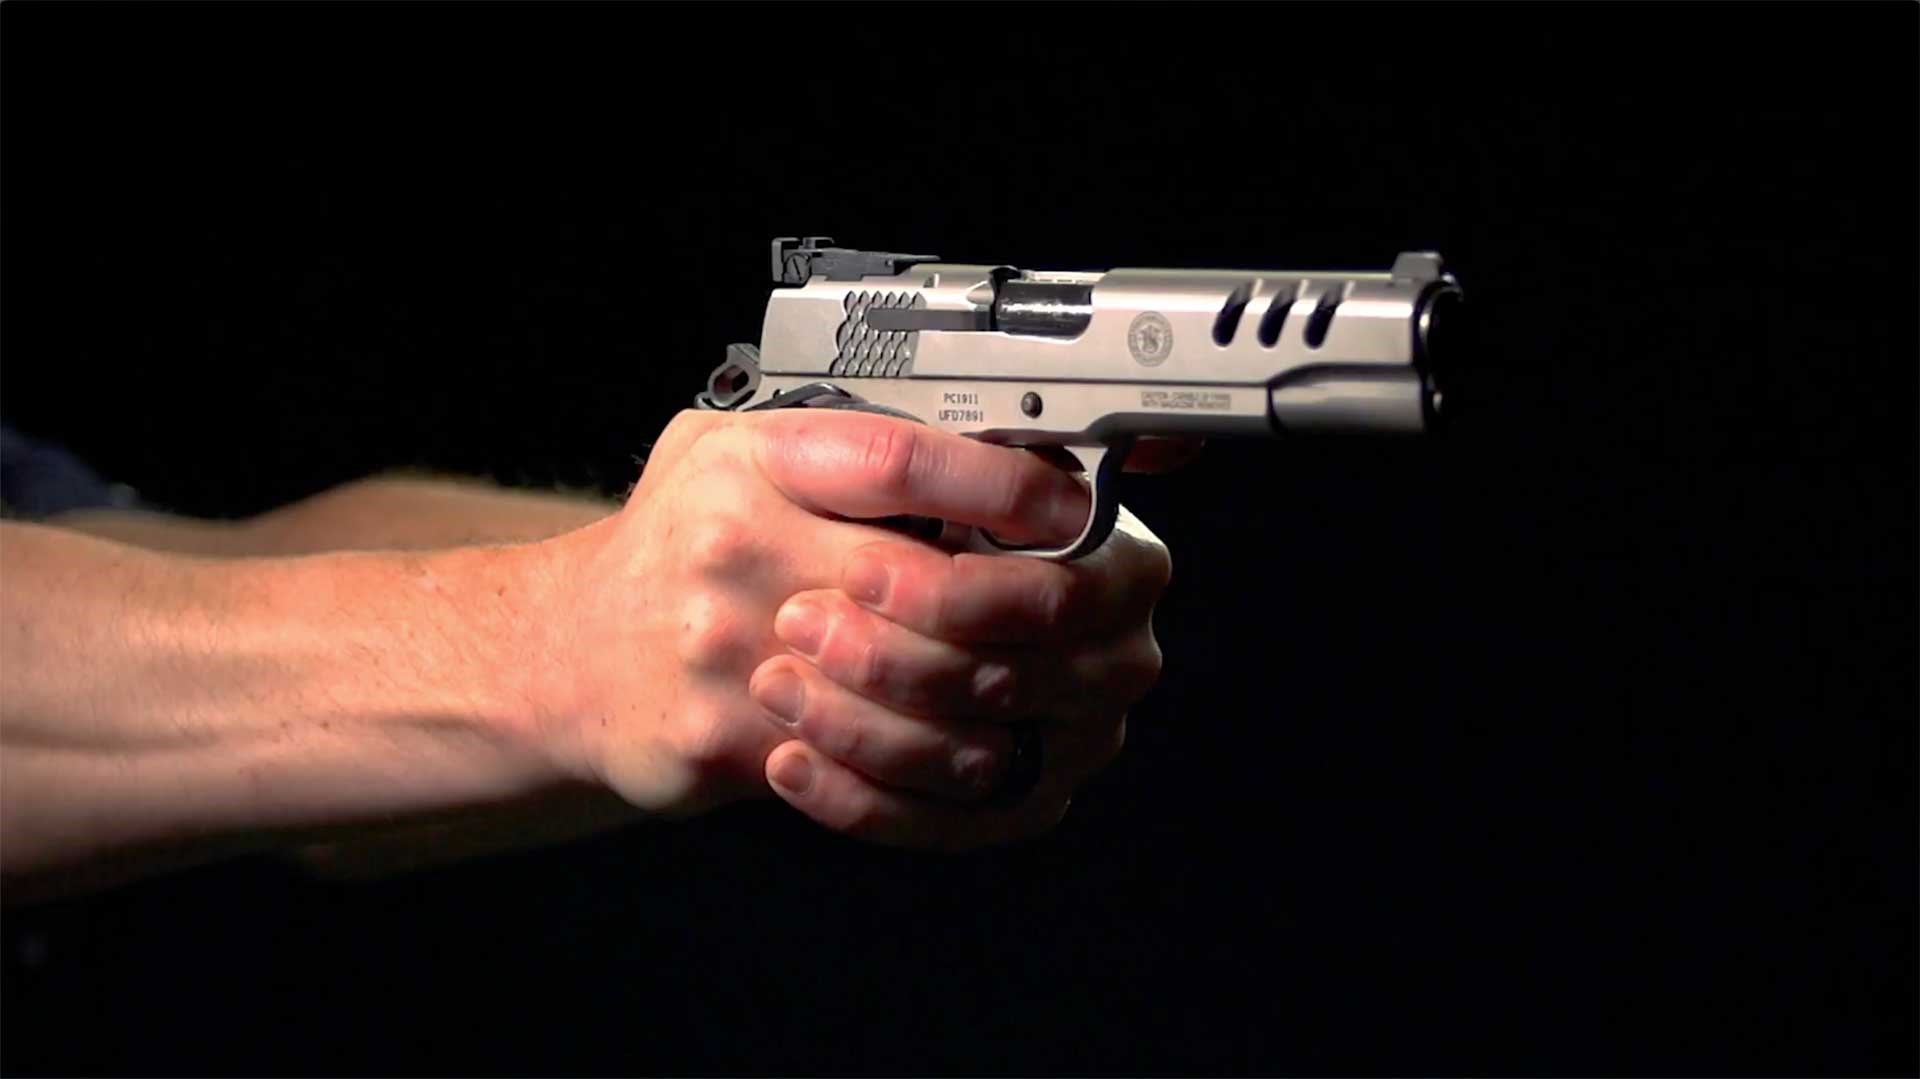 A pair of hands holding a Smith & Wesson Performance Center SW1911 pistol on a dark range.